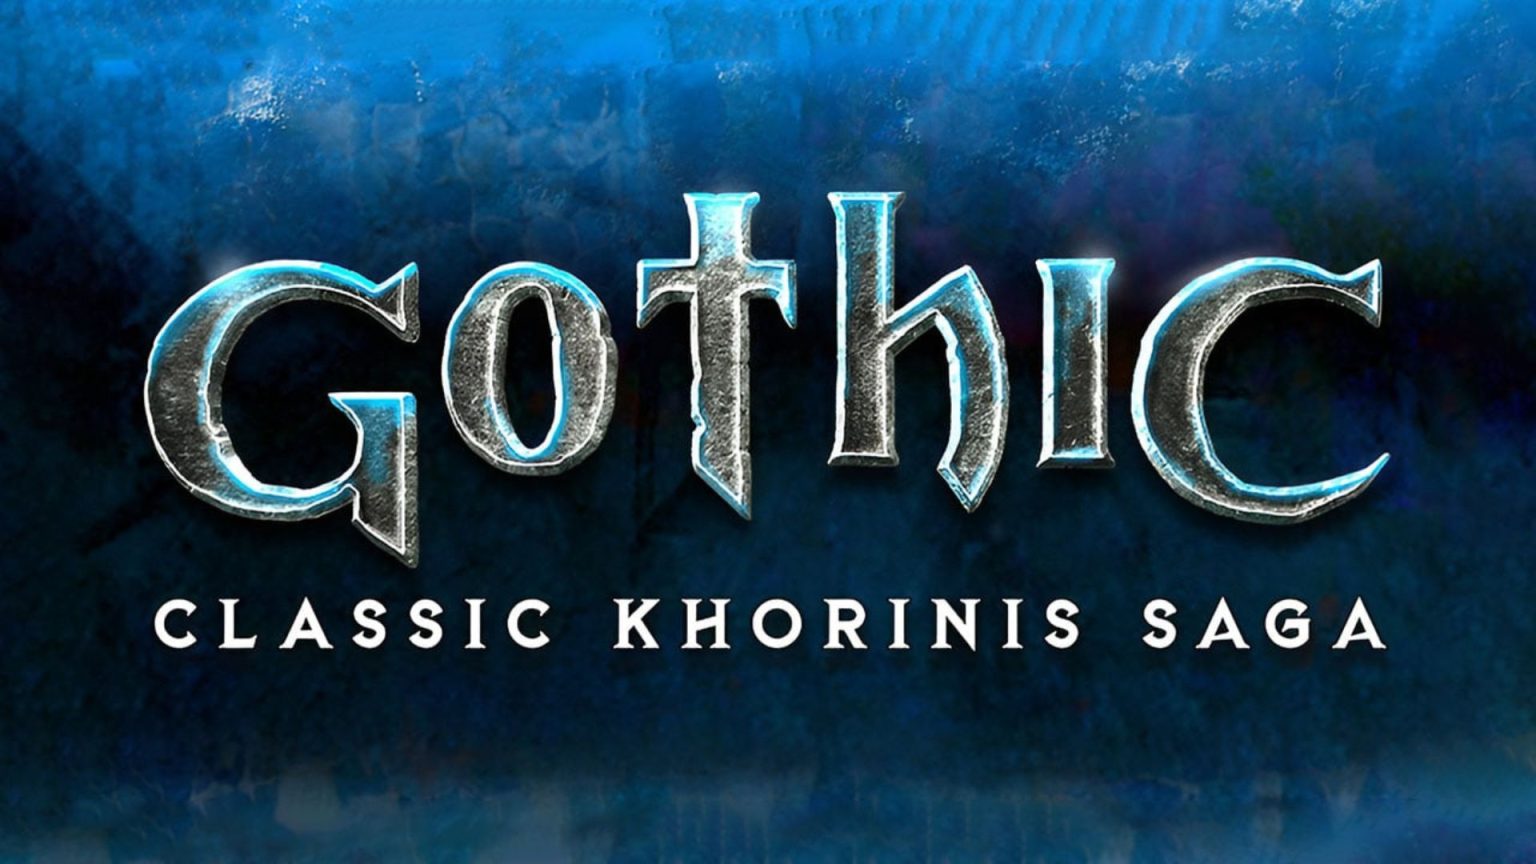 Gothic Classic Khorinis Saga Collection to be released on Nintendo Switch in June